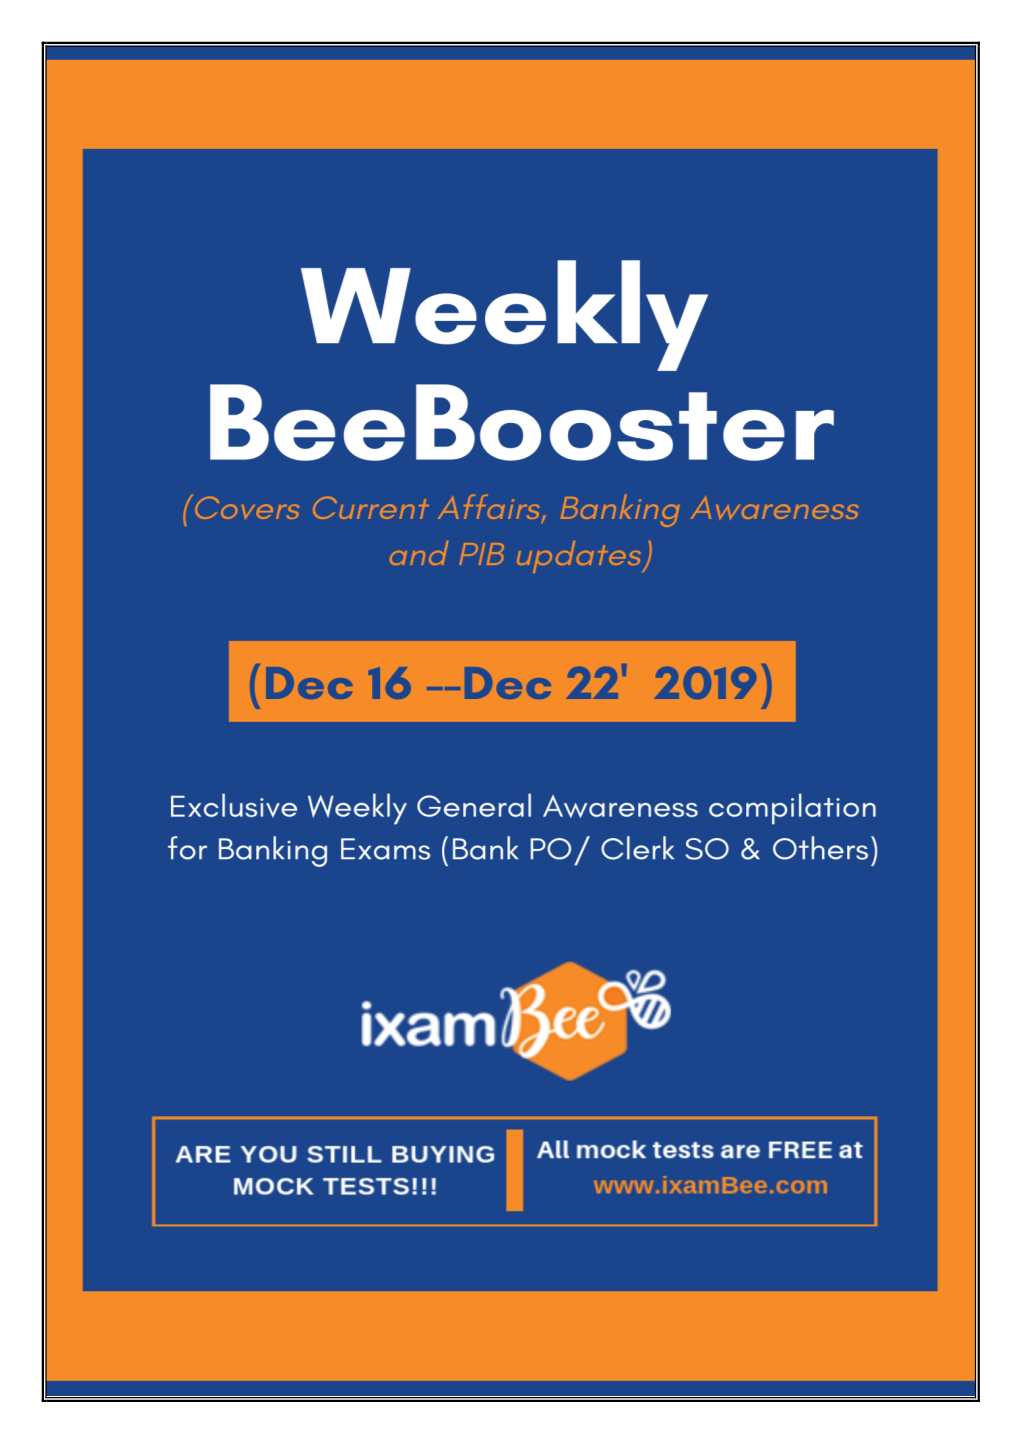 Weekly Beebooster 16Th Dec to 22Nd Dec 2019